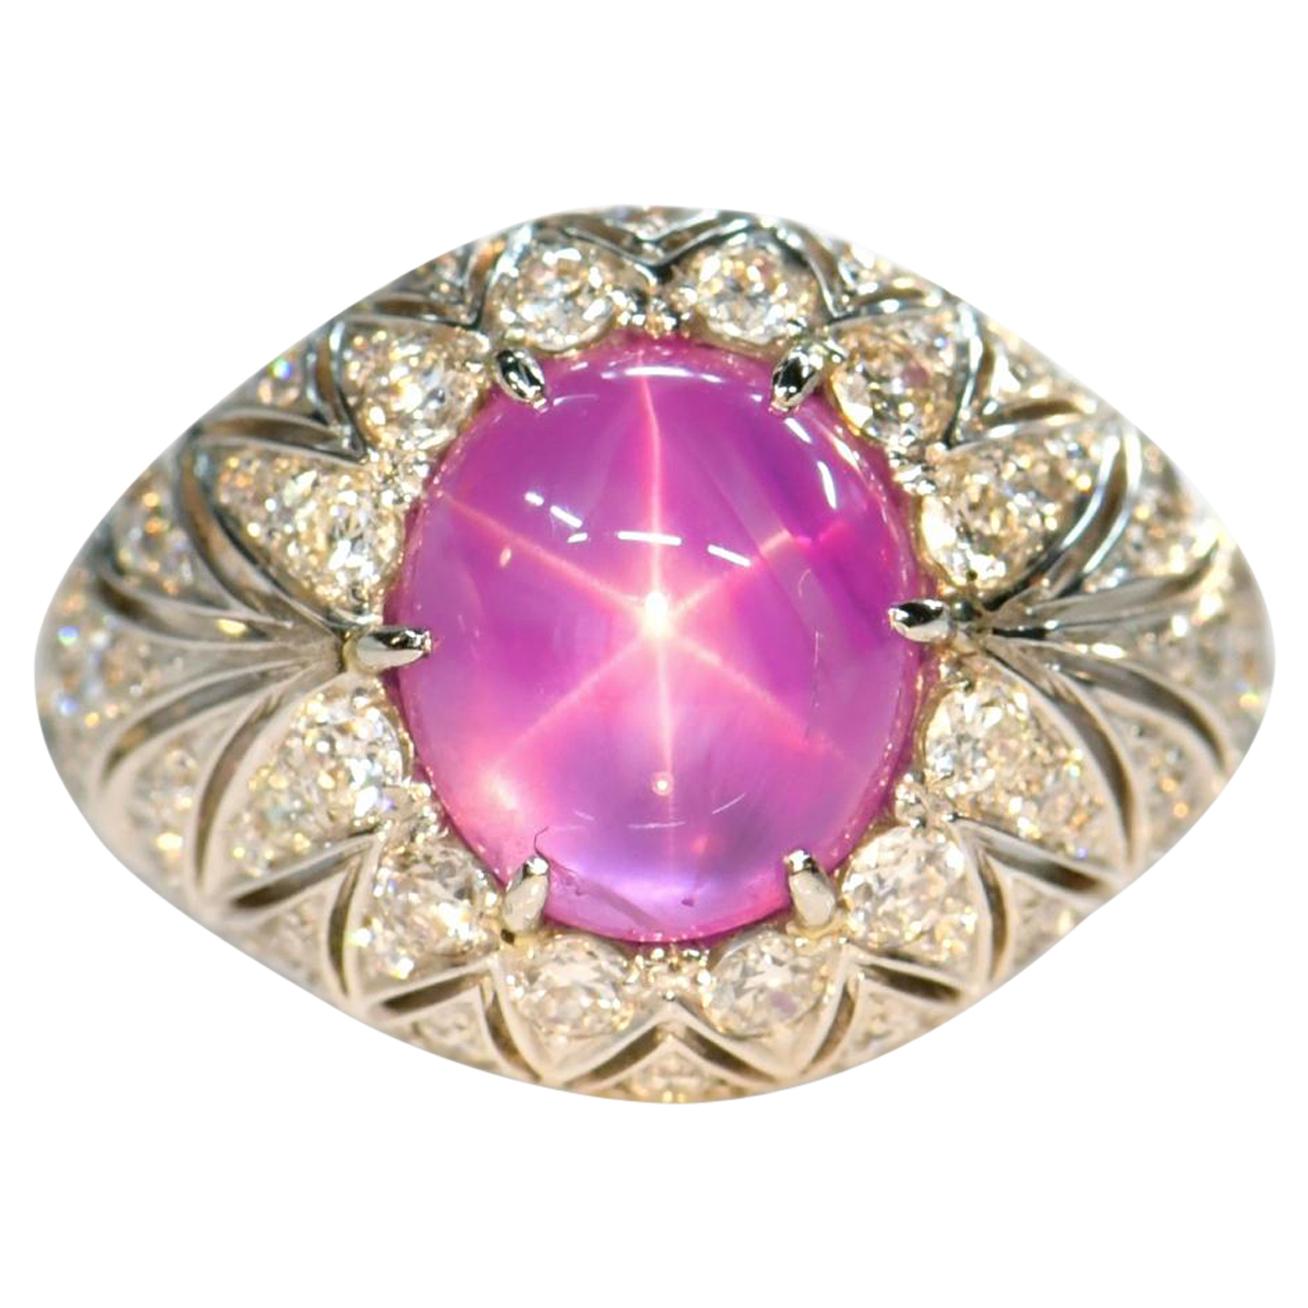 Buy Pink Lindy Star Sapphire Ring, Pink Star Sapphire, Lindy Star Ring, 925  Sterling Silver, 6 Rays Star Ring, Star Gemstone Lindy Star Sapphire Online  in India - Etsy